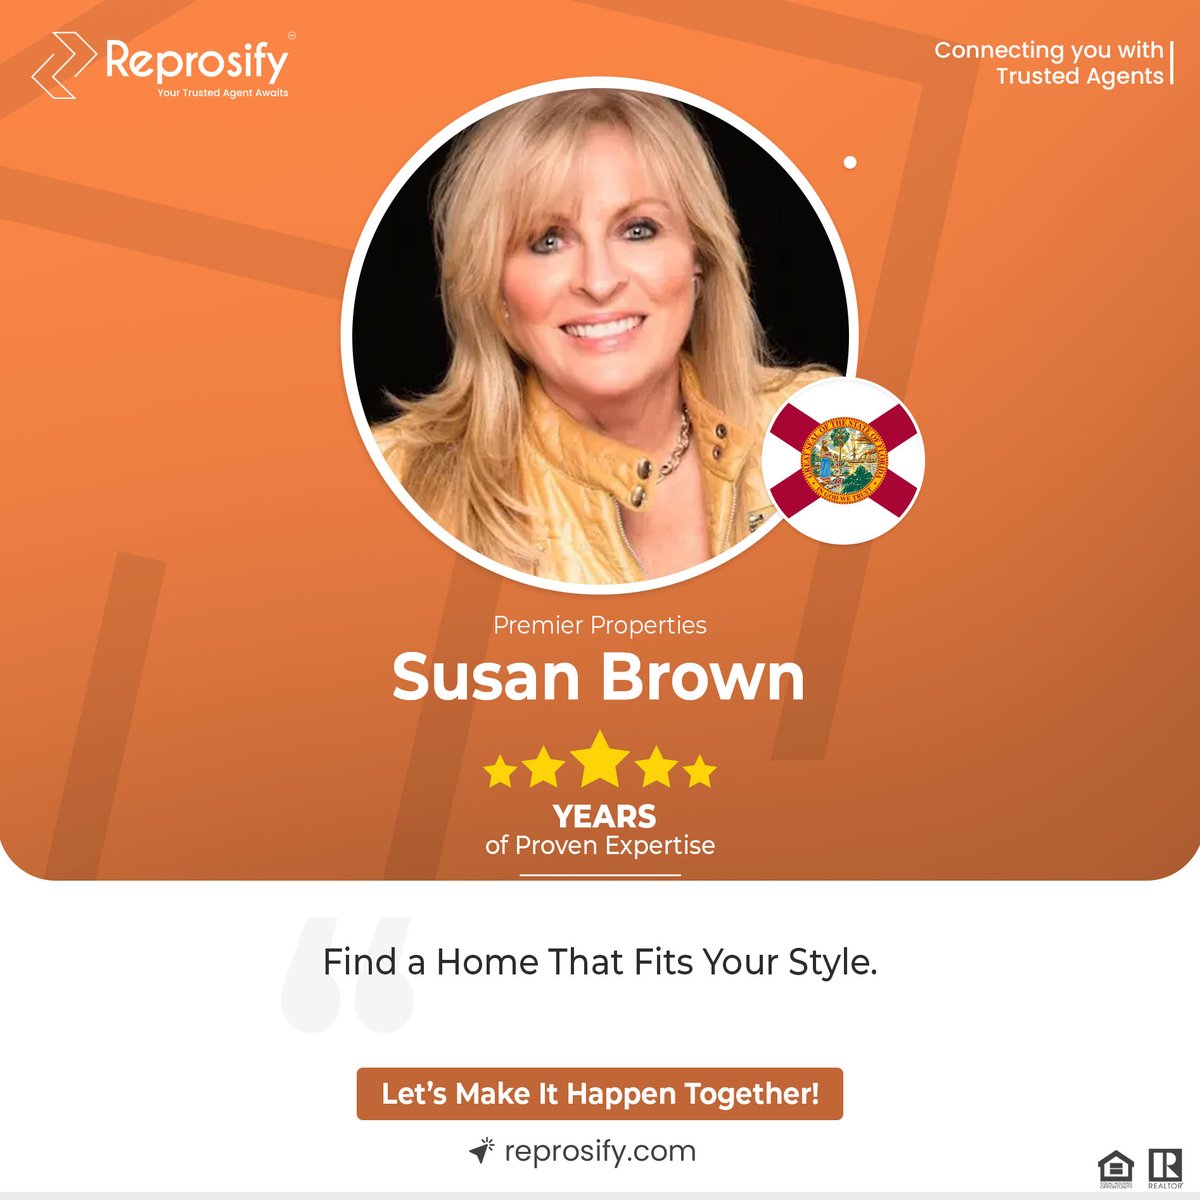 Join Susan Brown on a journey to find your personal haven in Florida. Live the life you've always dreamed of!

👤agents.reprosify.com/susan-brown

#Reprosify #AgentsReprosify #PremierProperties #SusanBrown #realestate #realestateagent #Broker #Floridarealestate #LakewoodRanchrealestate